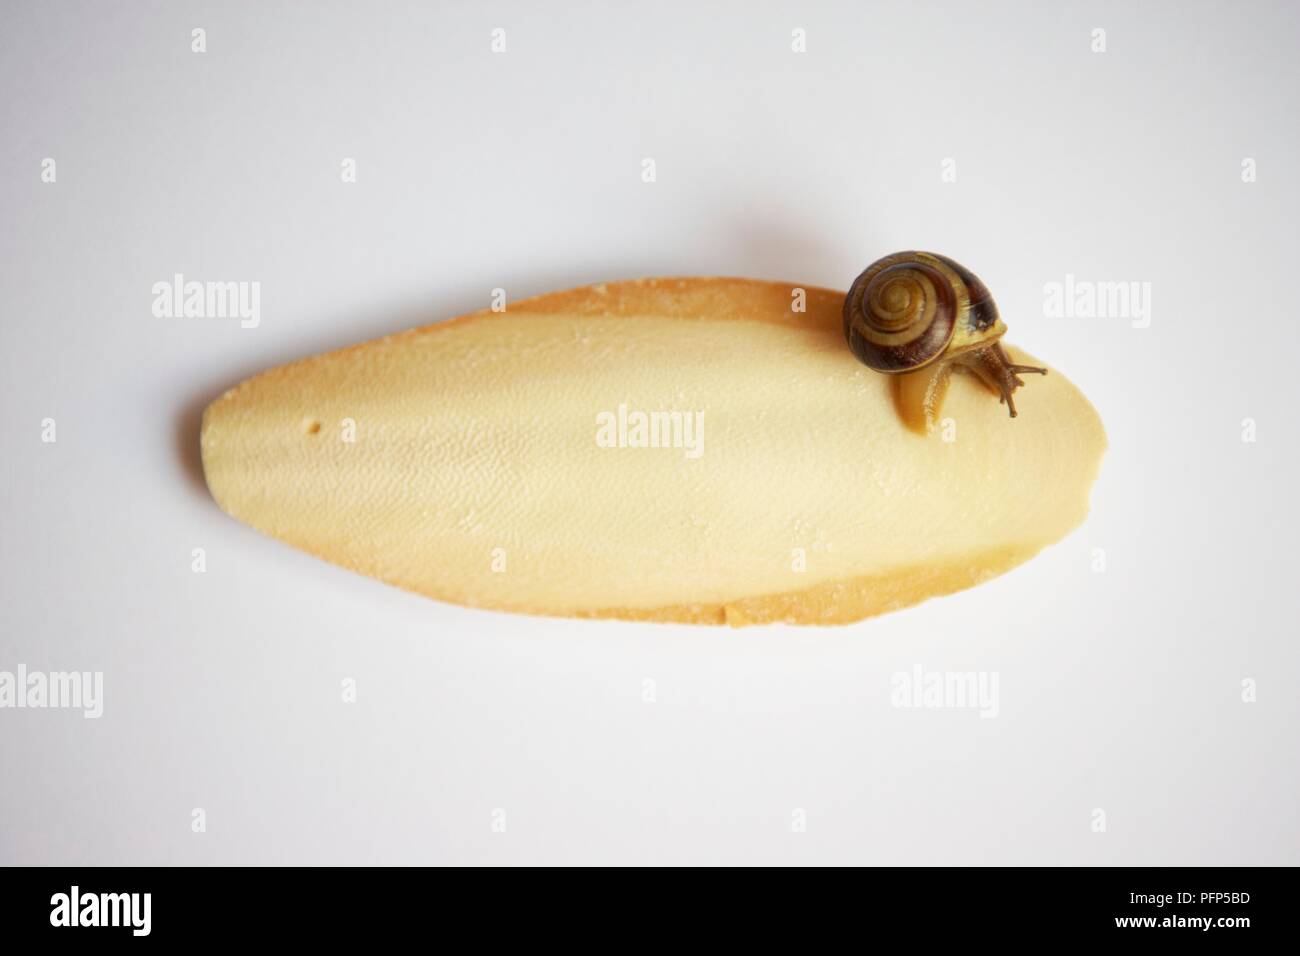 Banded snail (Cepea sp.) on cuttlefish bone, a source of calcium Stock Photo